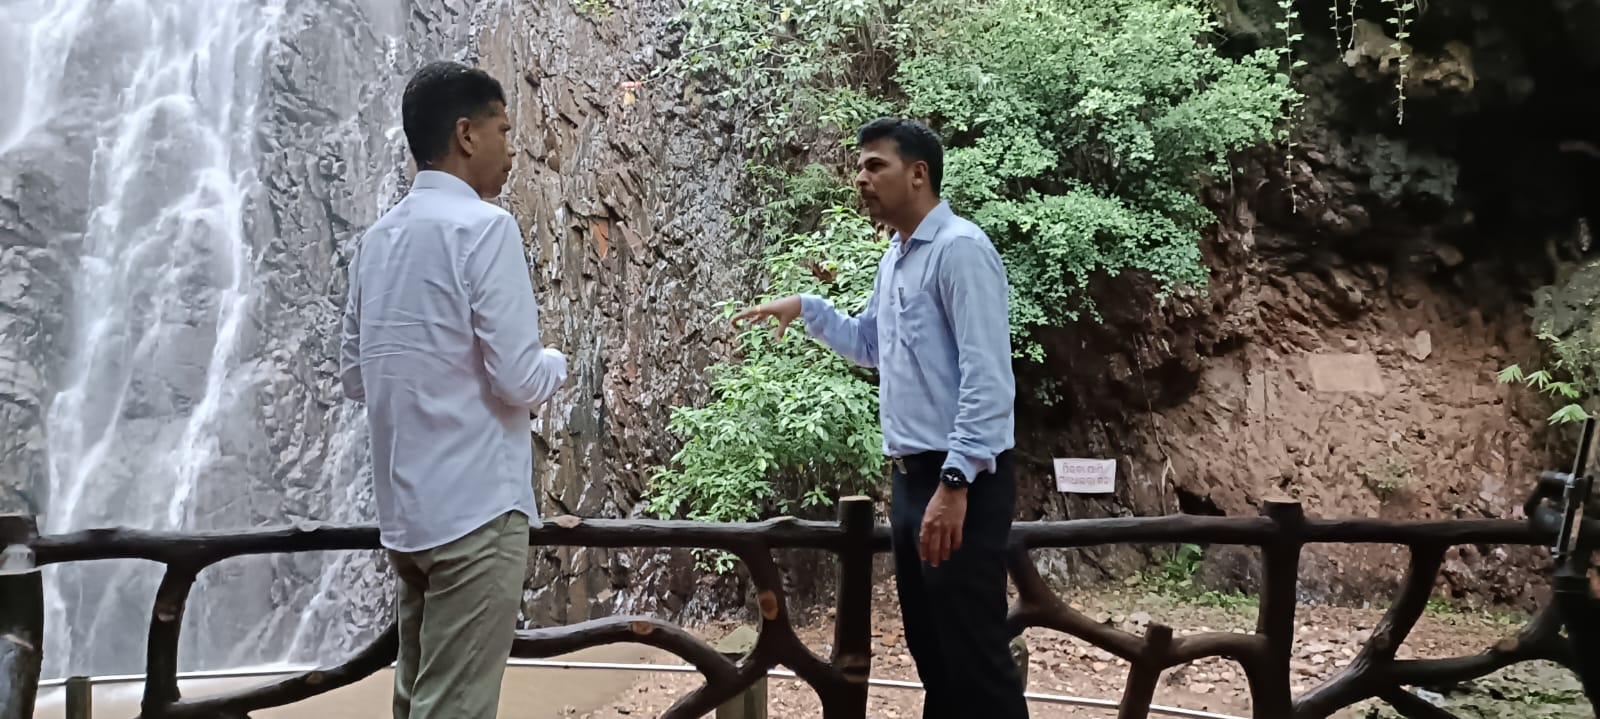 5T Secy Visits Deogarh